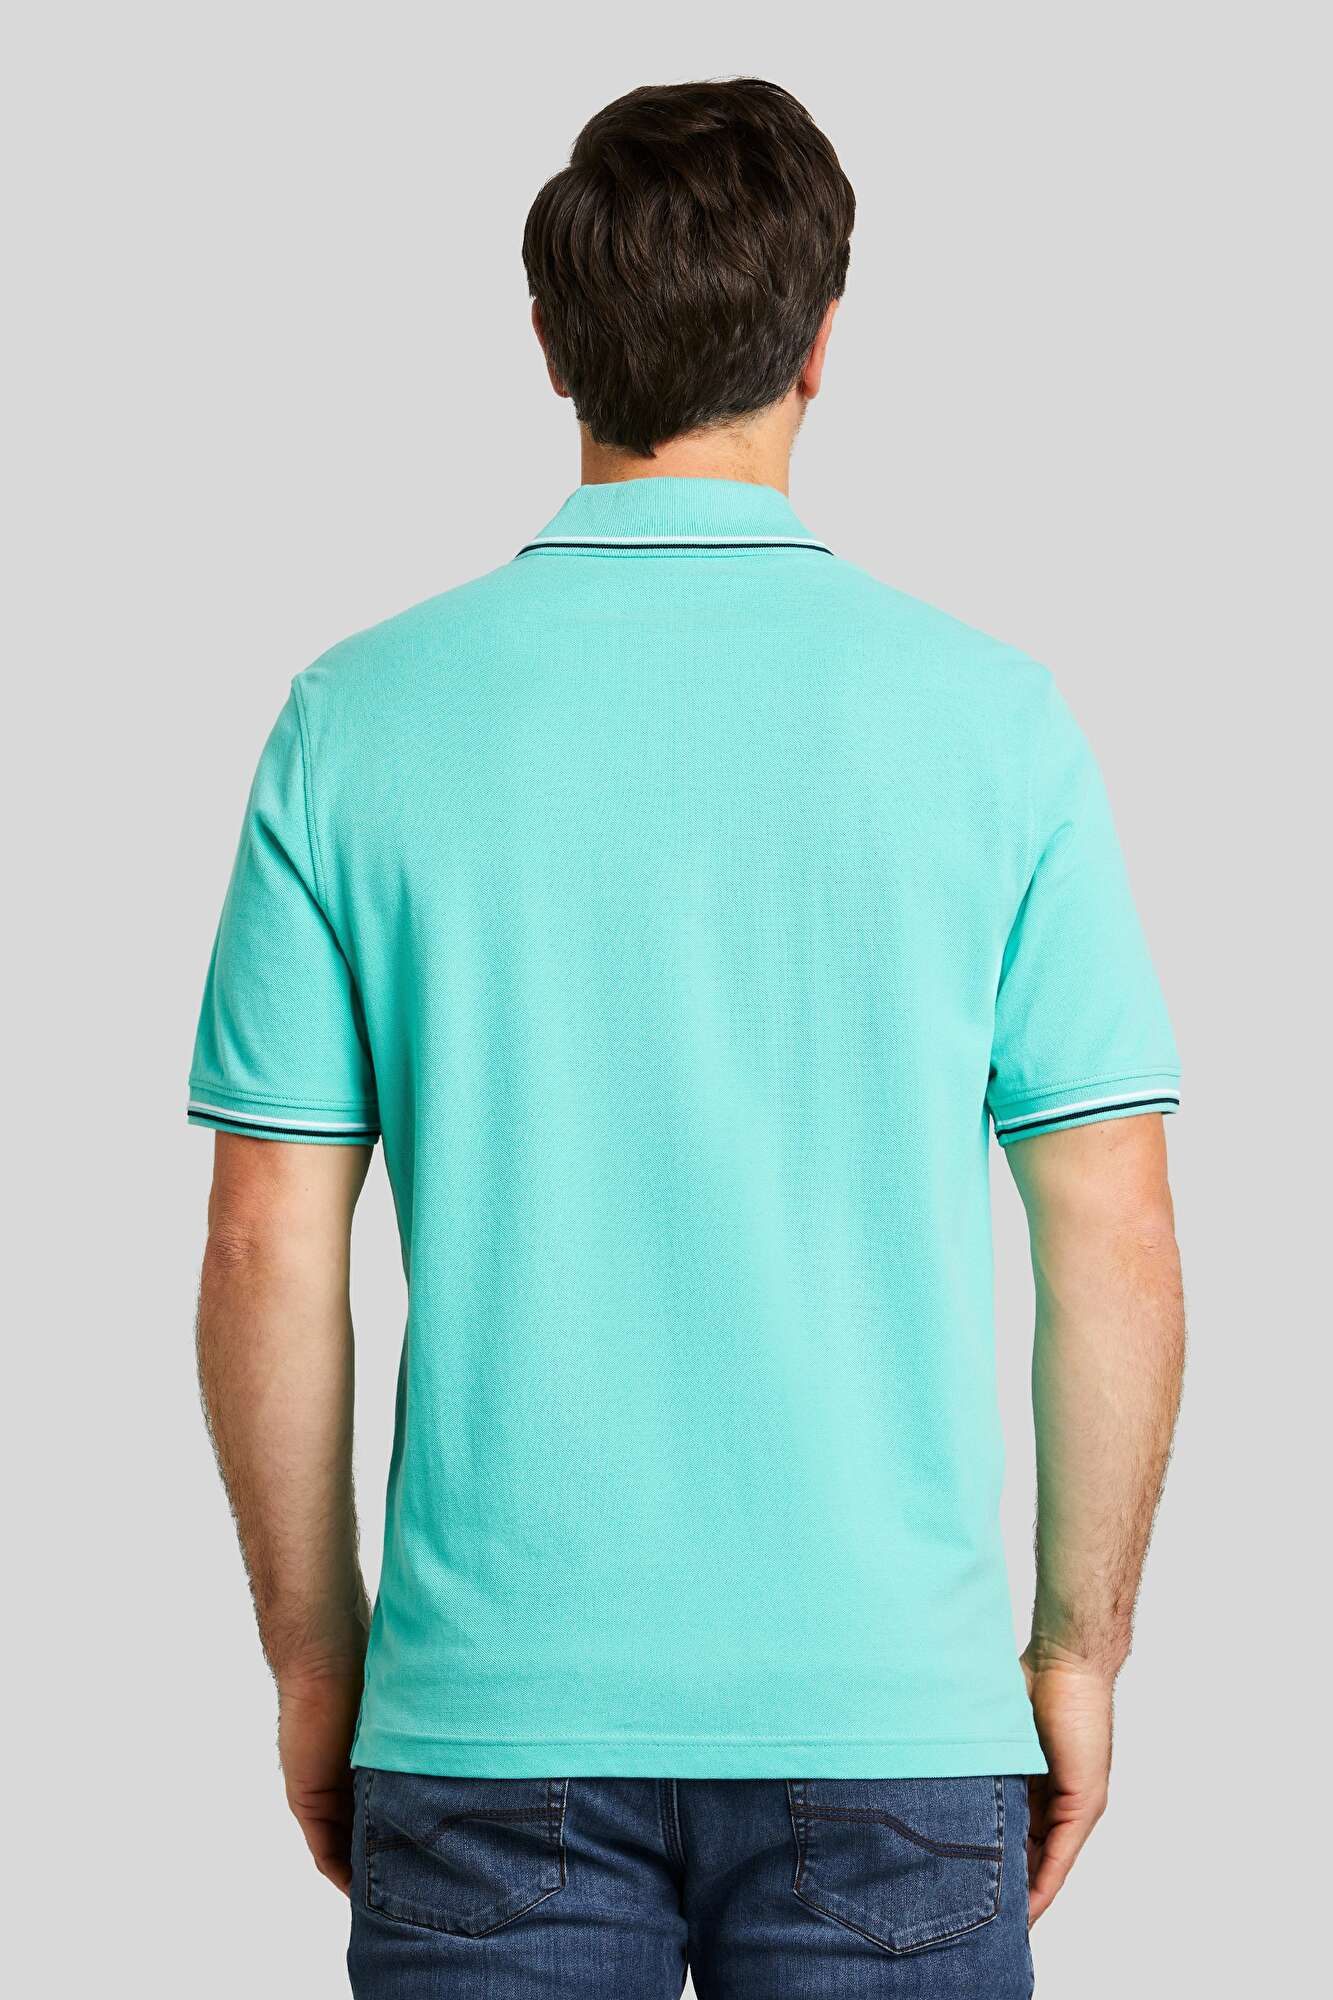 with Pique the contrasting collar cuffs in mint | on and bugatti sleeve stripes polo shirt